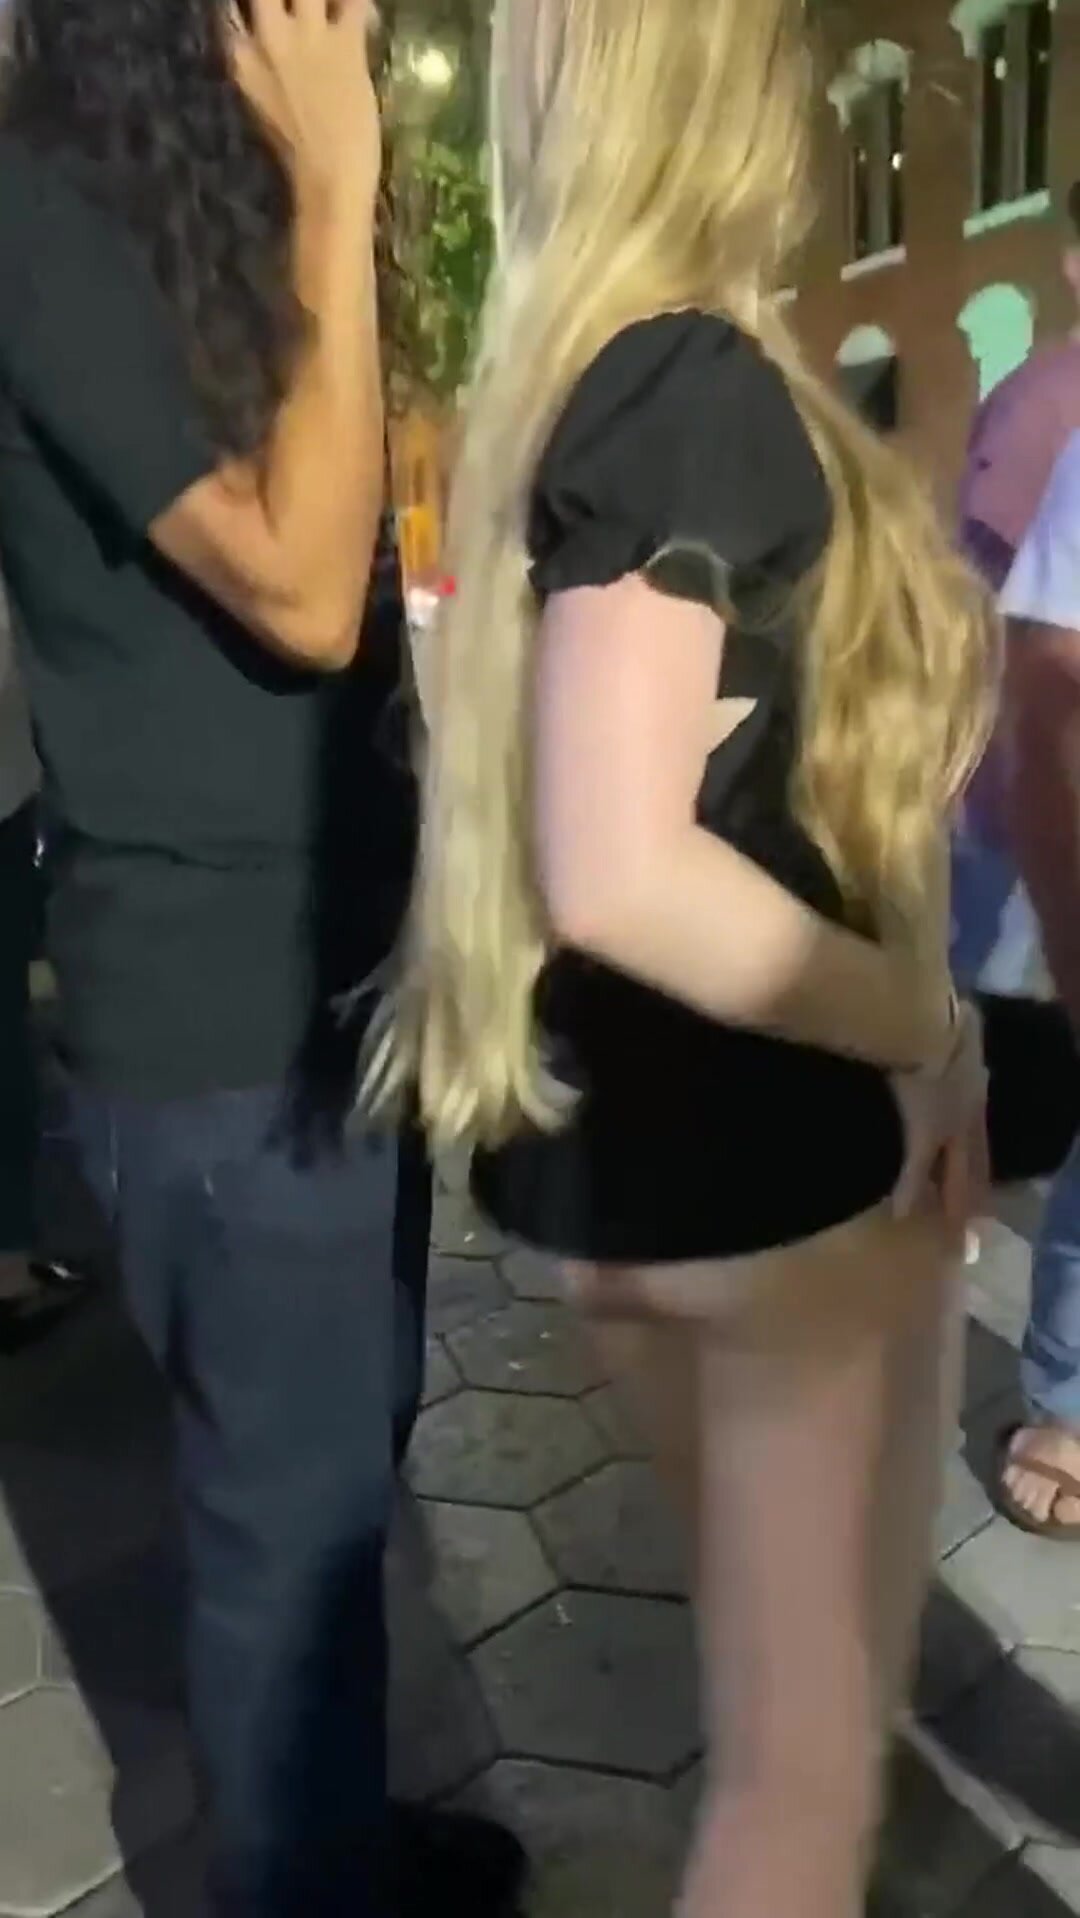 Flashing ass in the middle of the crowd